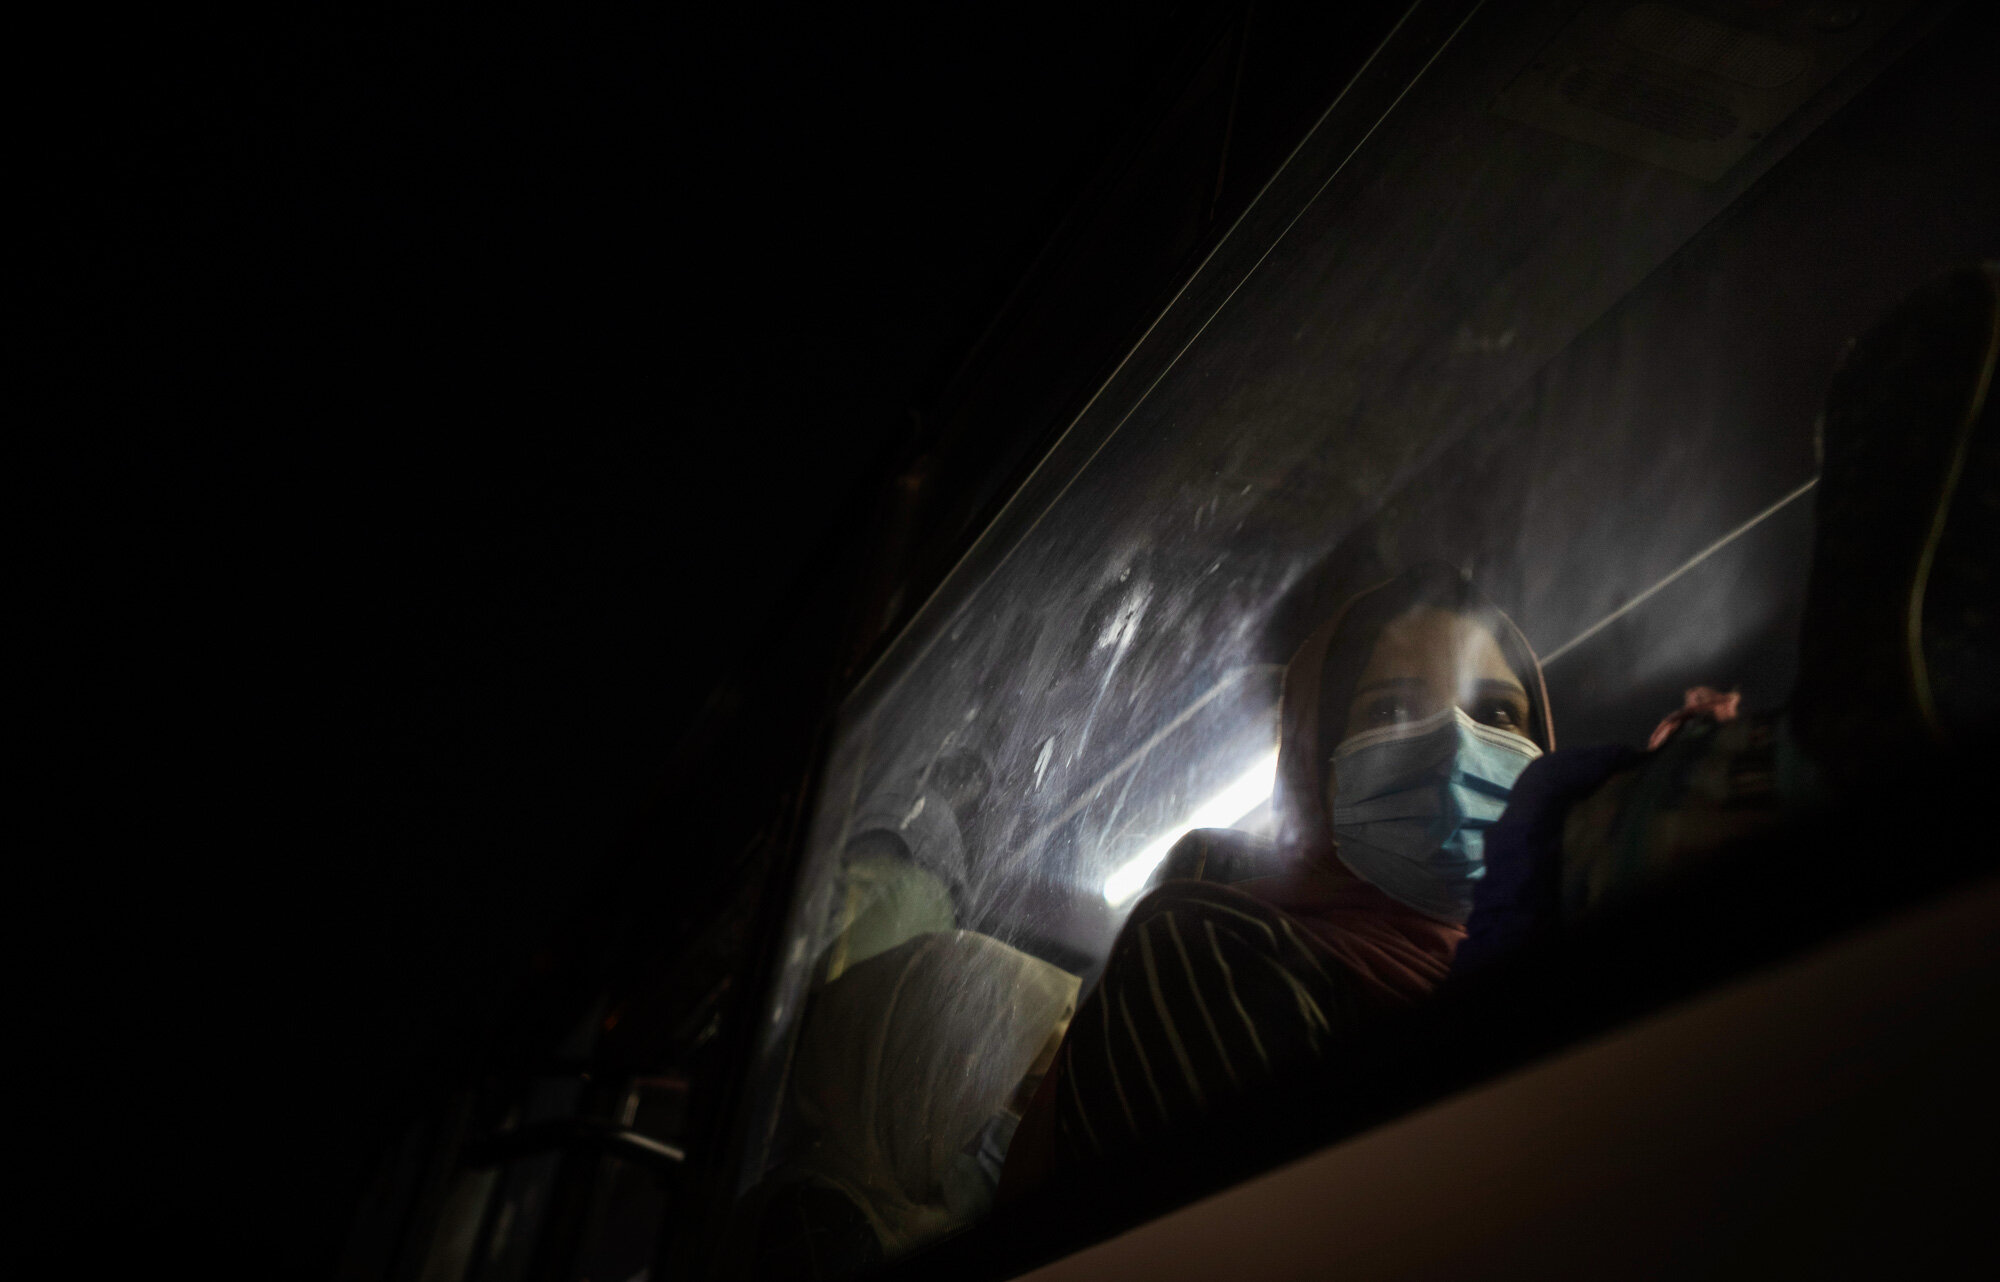  A Palestinian woman wearing a face mask to prevent the spread of the coronavirus waits in a bus in Gaza City to go to the Rafah border crossing into Egypt on Sept. 27, 2020. (AP Photo/Khalil Hamra) 